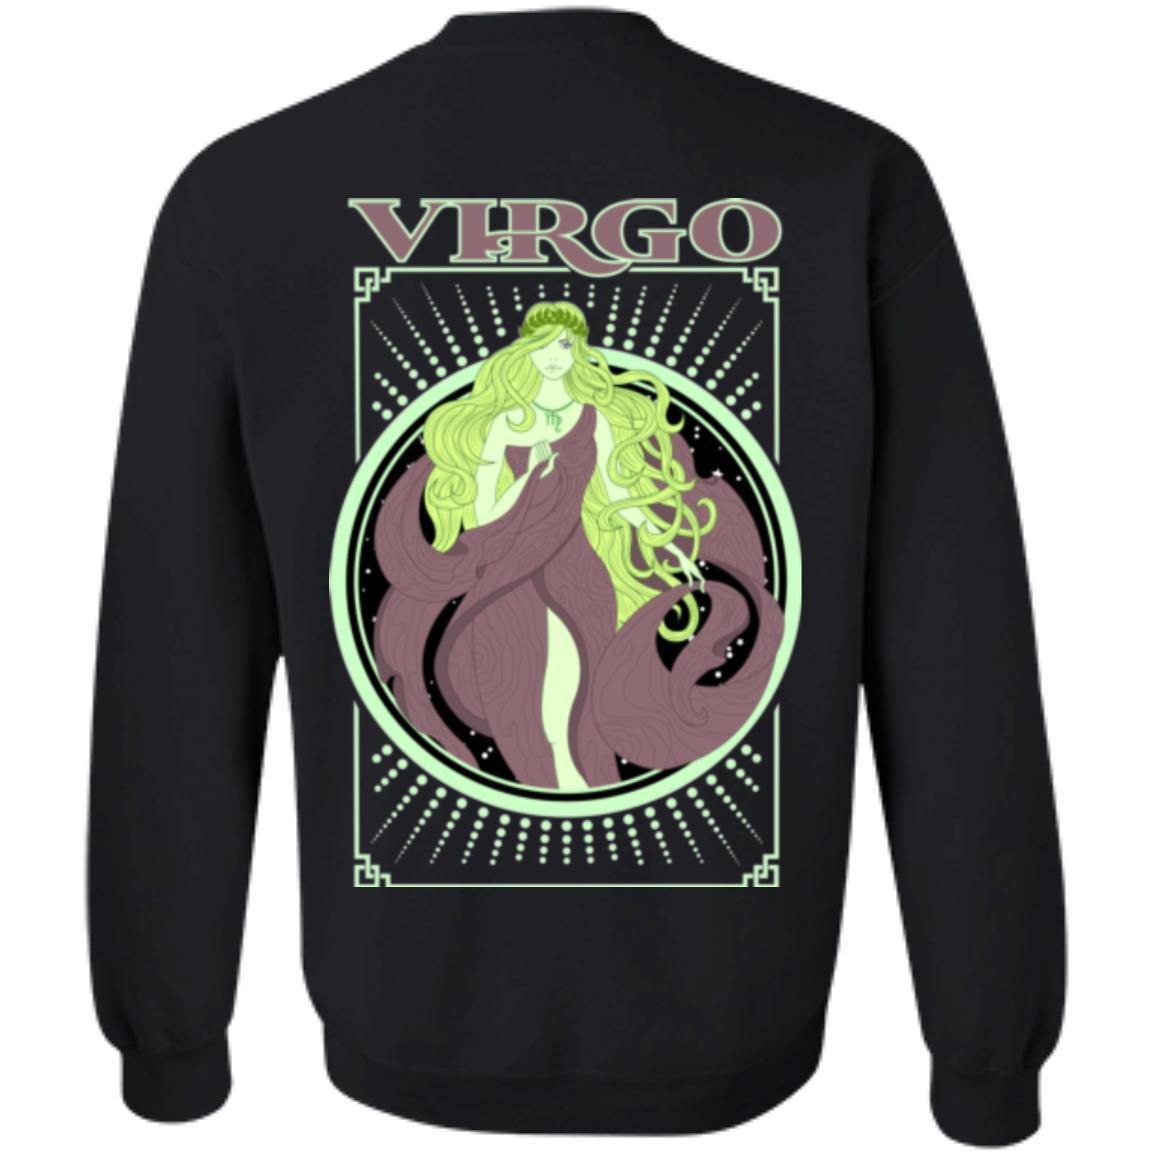 VIRGO DESIGN ON BACK AND SMALL SCORP ZONE LOGO ON FRONT -Z65 Crewneck Pullover Sweatshirt - ScorpZone